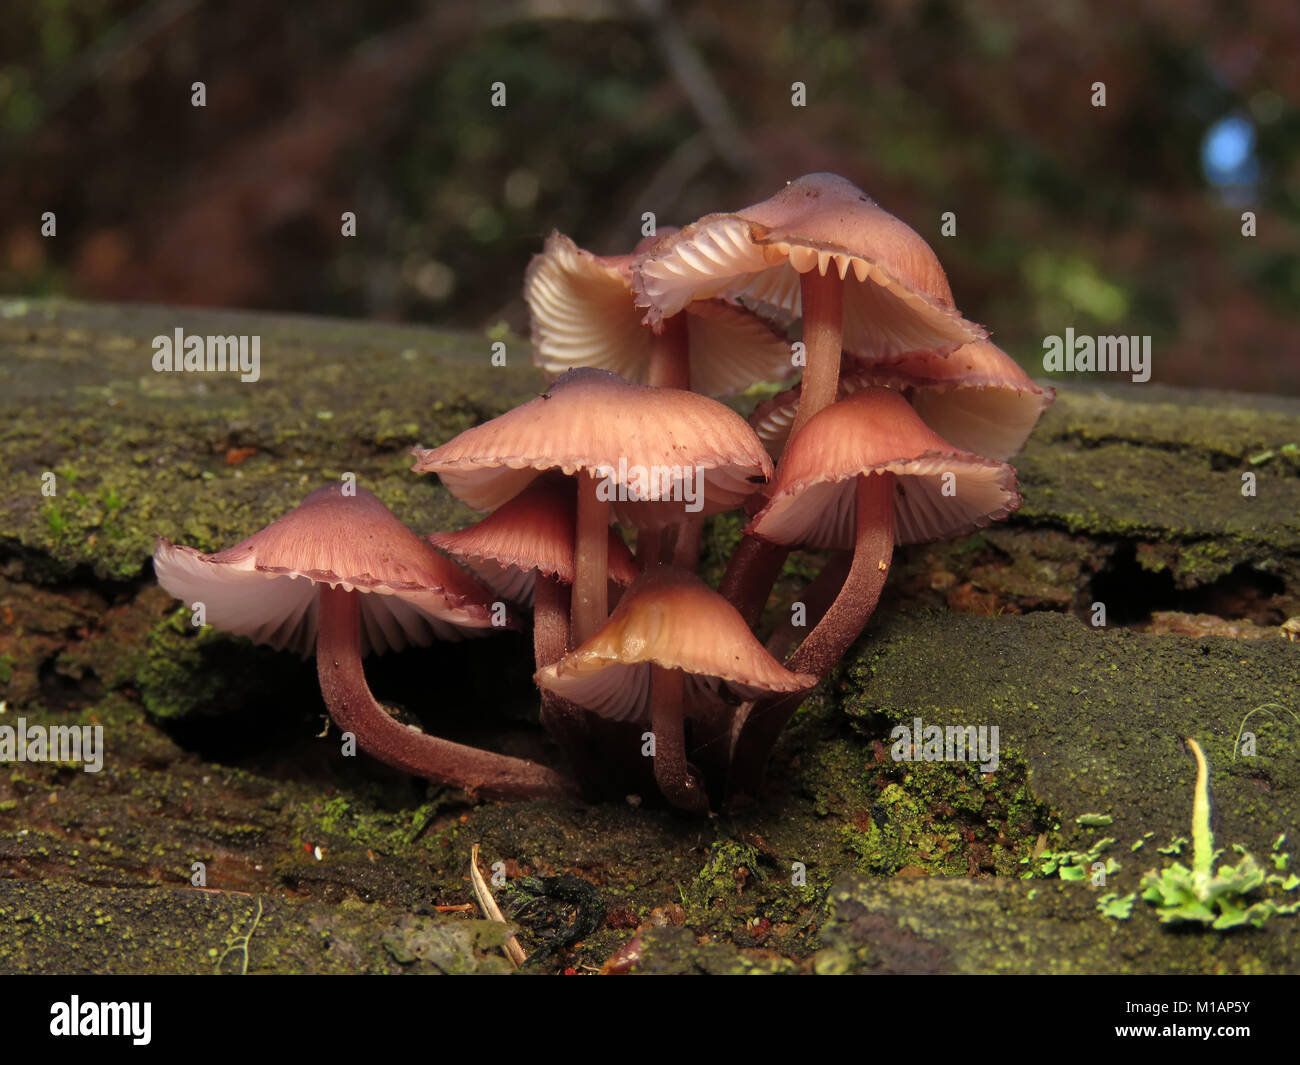 Mycena mushrooms (likely Mycena haematopus) growing on wood in a Pacific Northwest forest Stock Photo